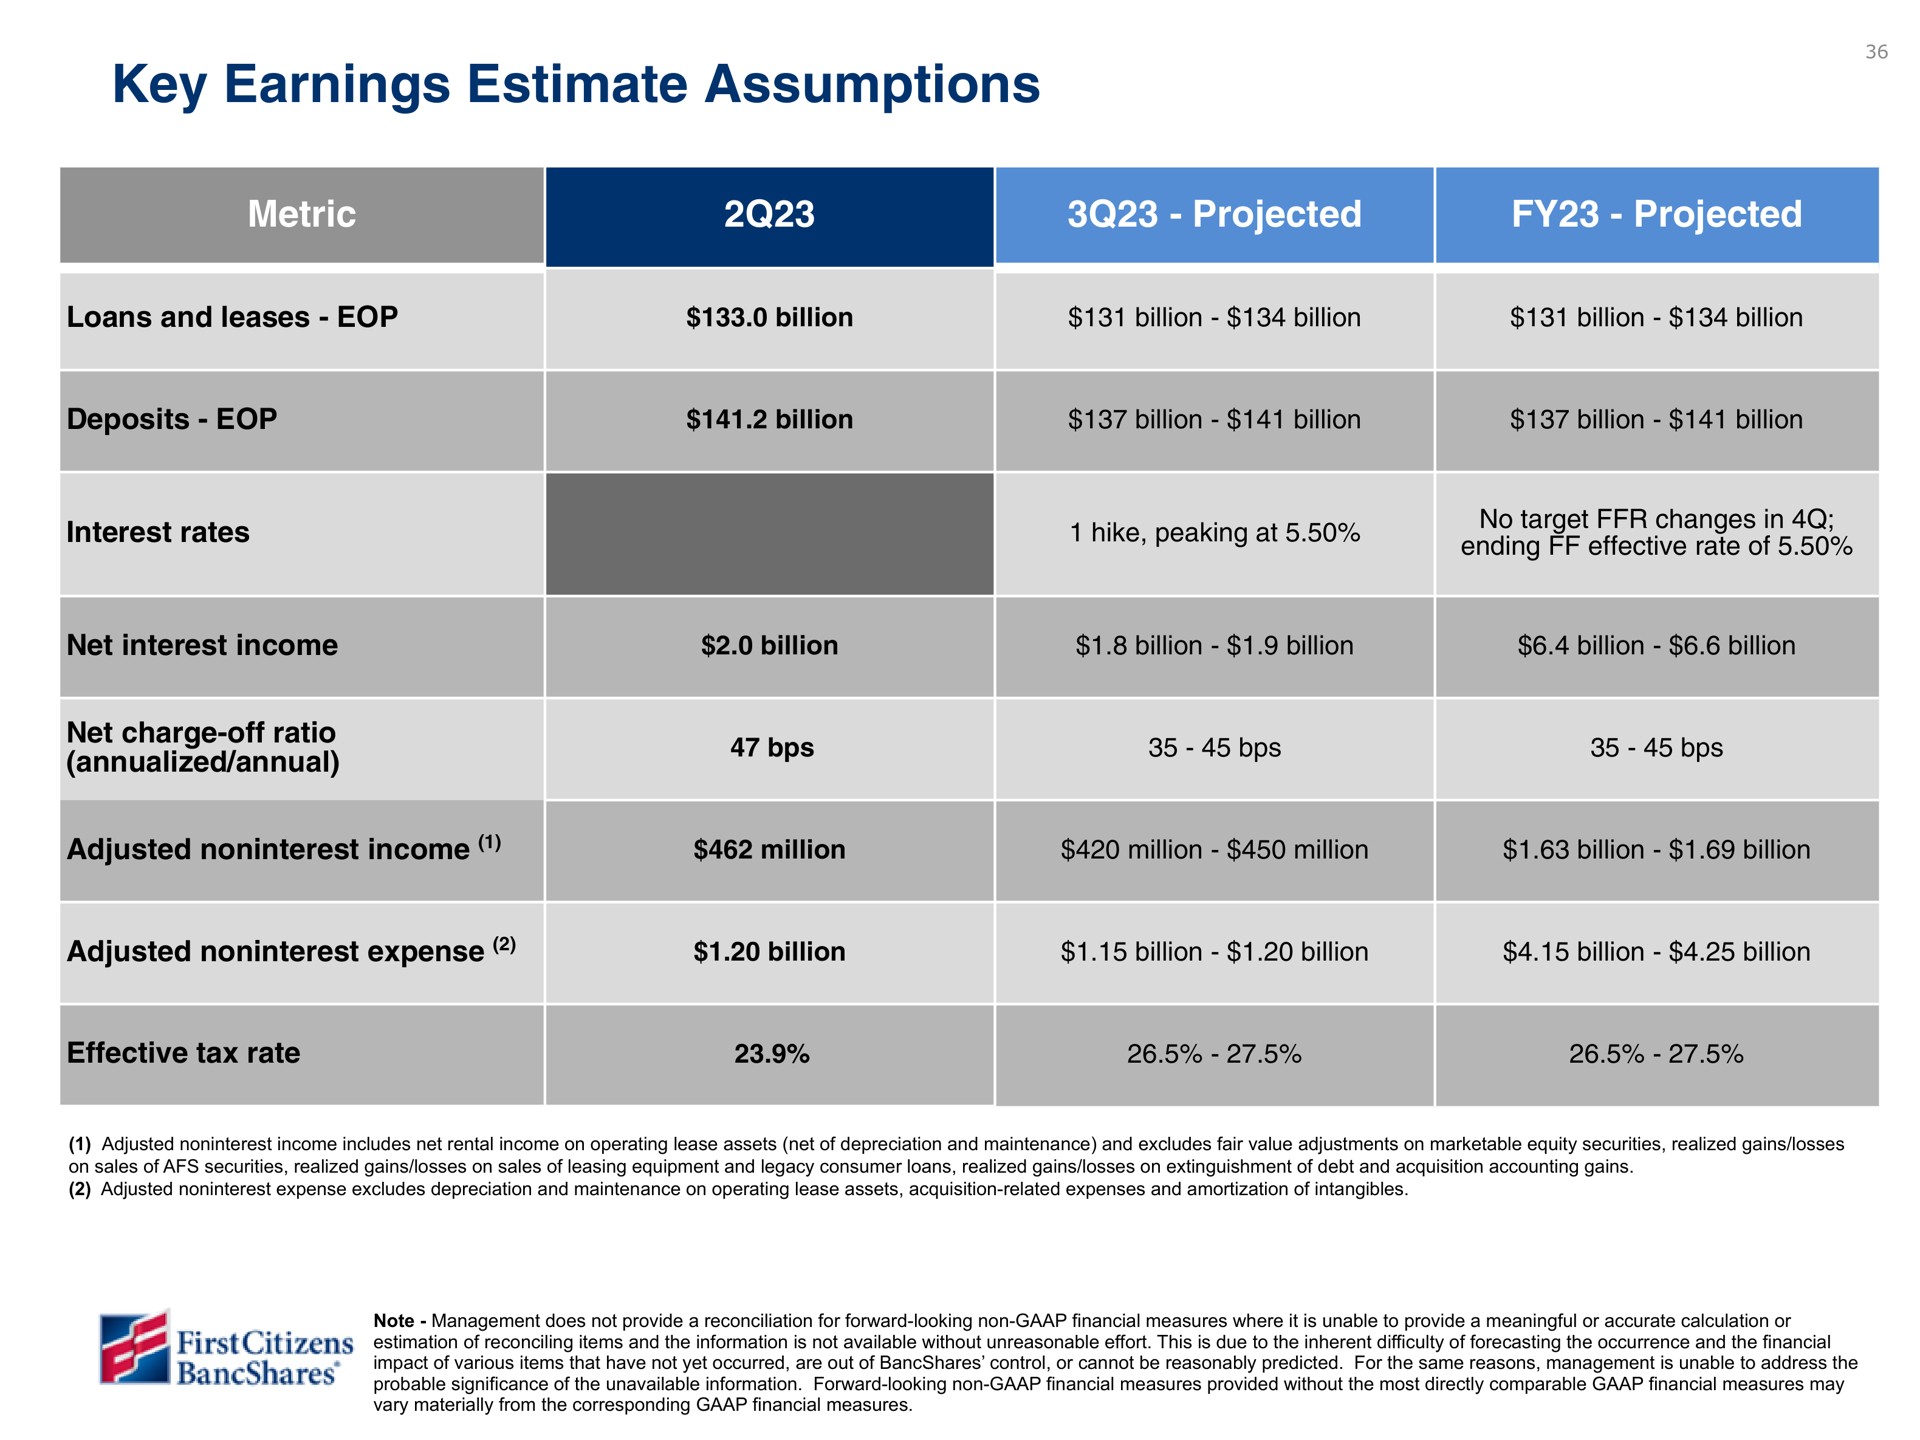 key earnings estimate assumptions projected projected | First Citizens BancShares